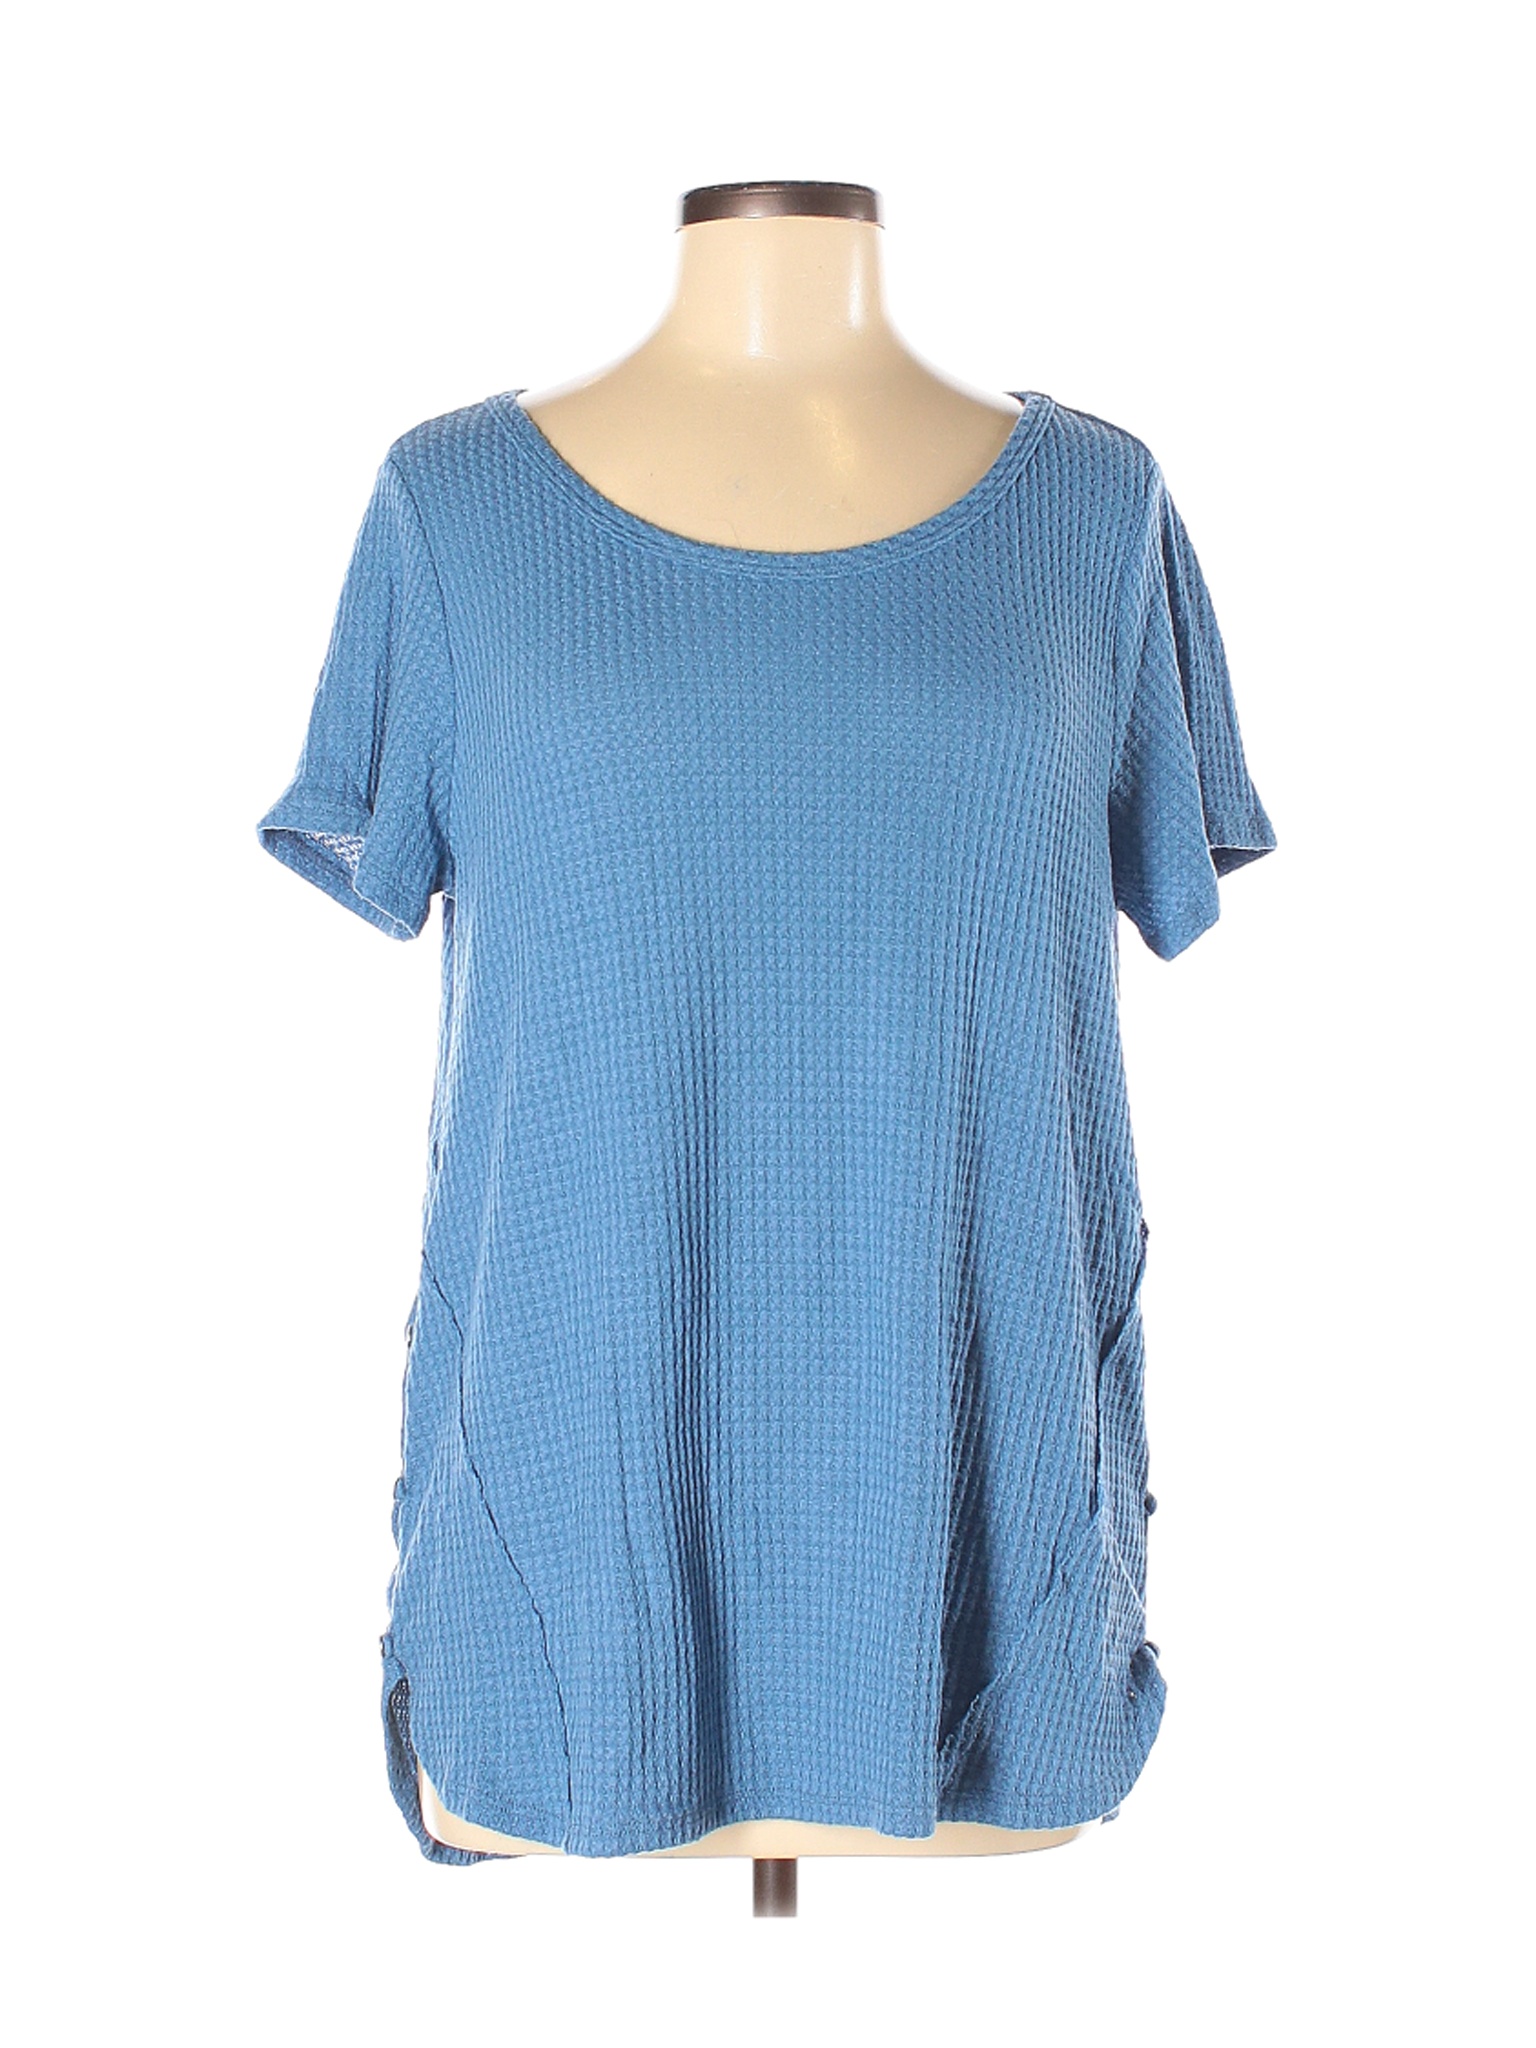 Soft Surroundings Solid Blue Short Sleeve Top Size M - 56% off | thredUP